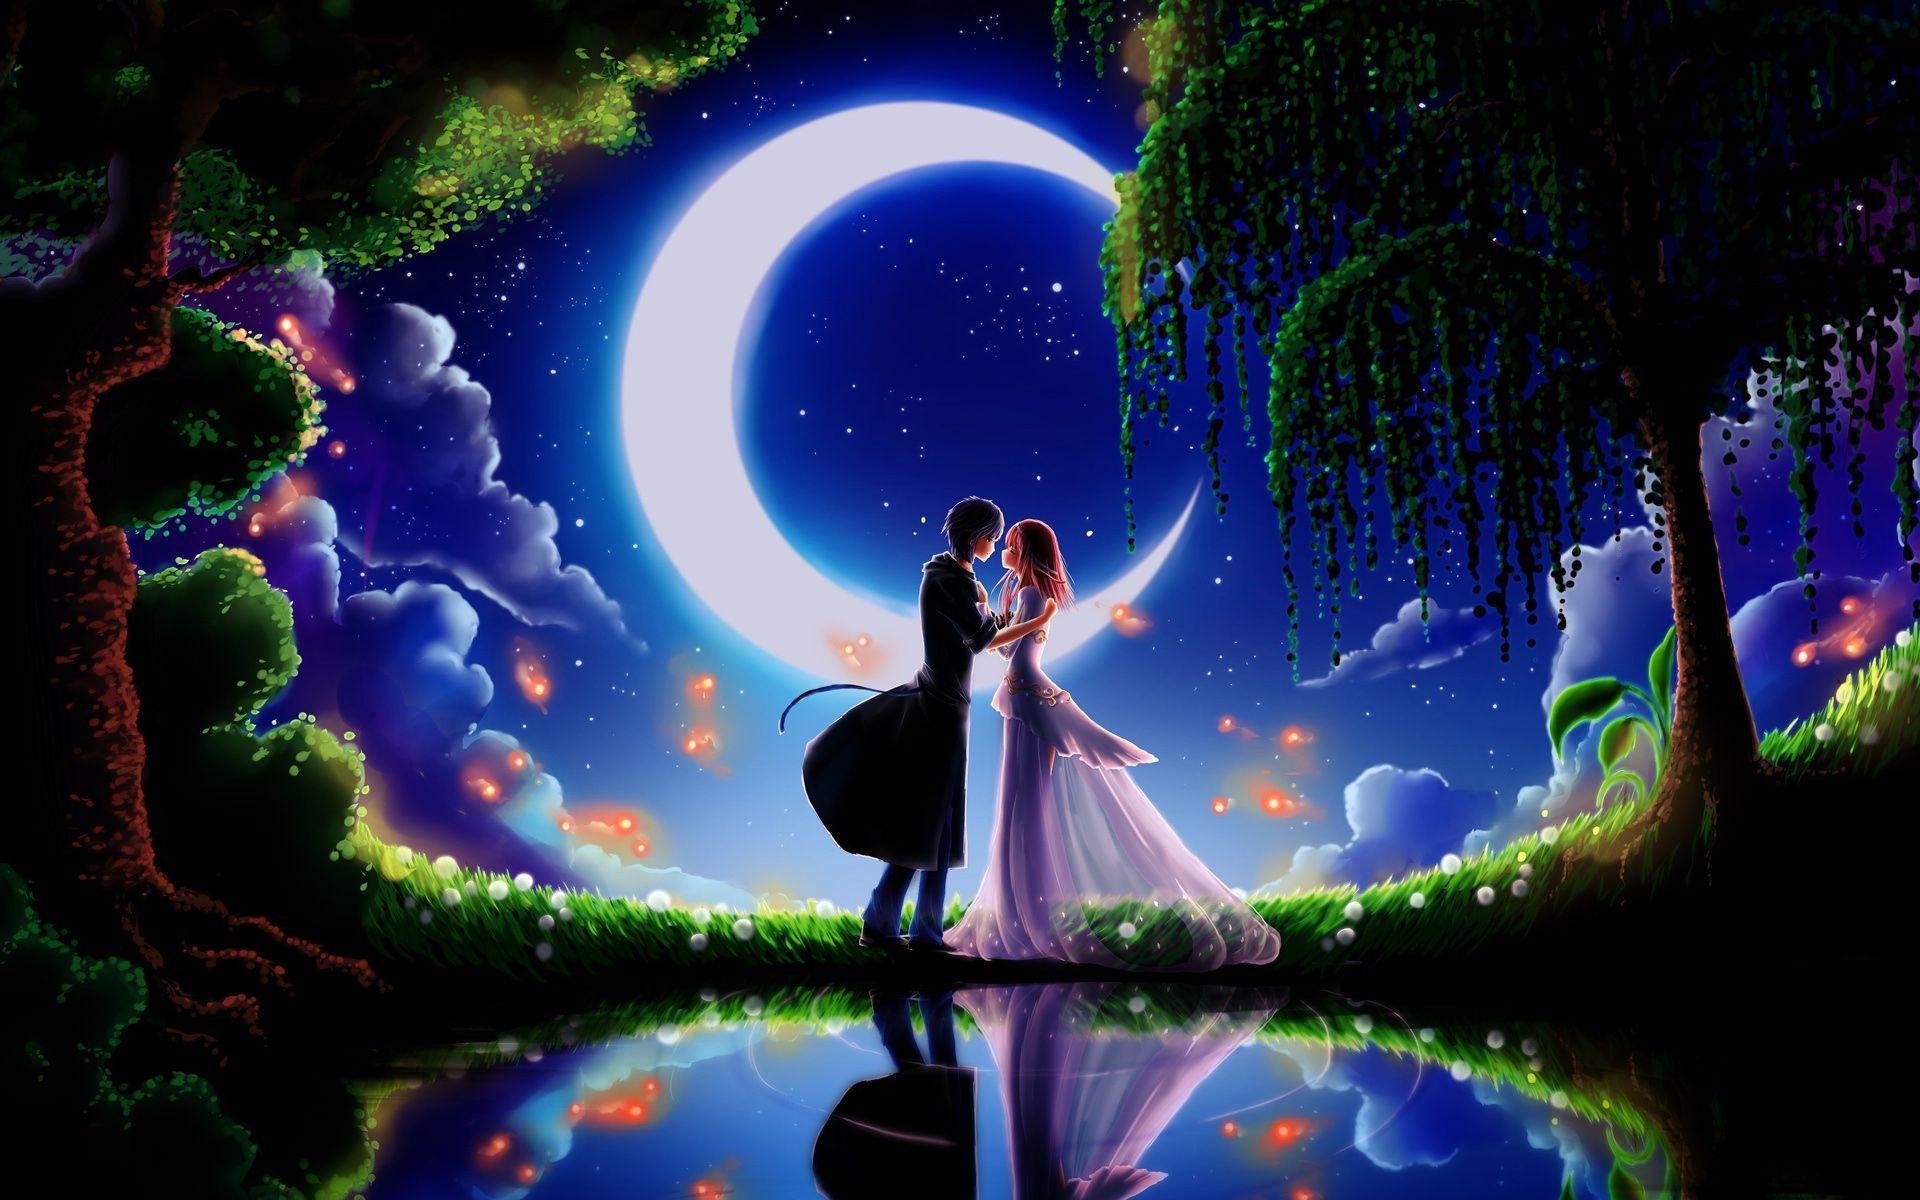 Moon Love Story. Anime Love. Free background image